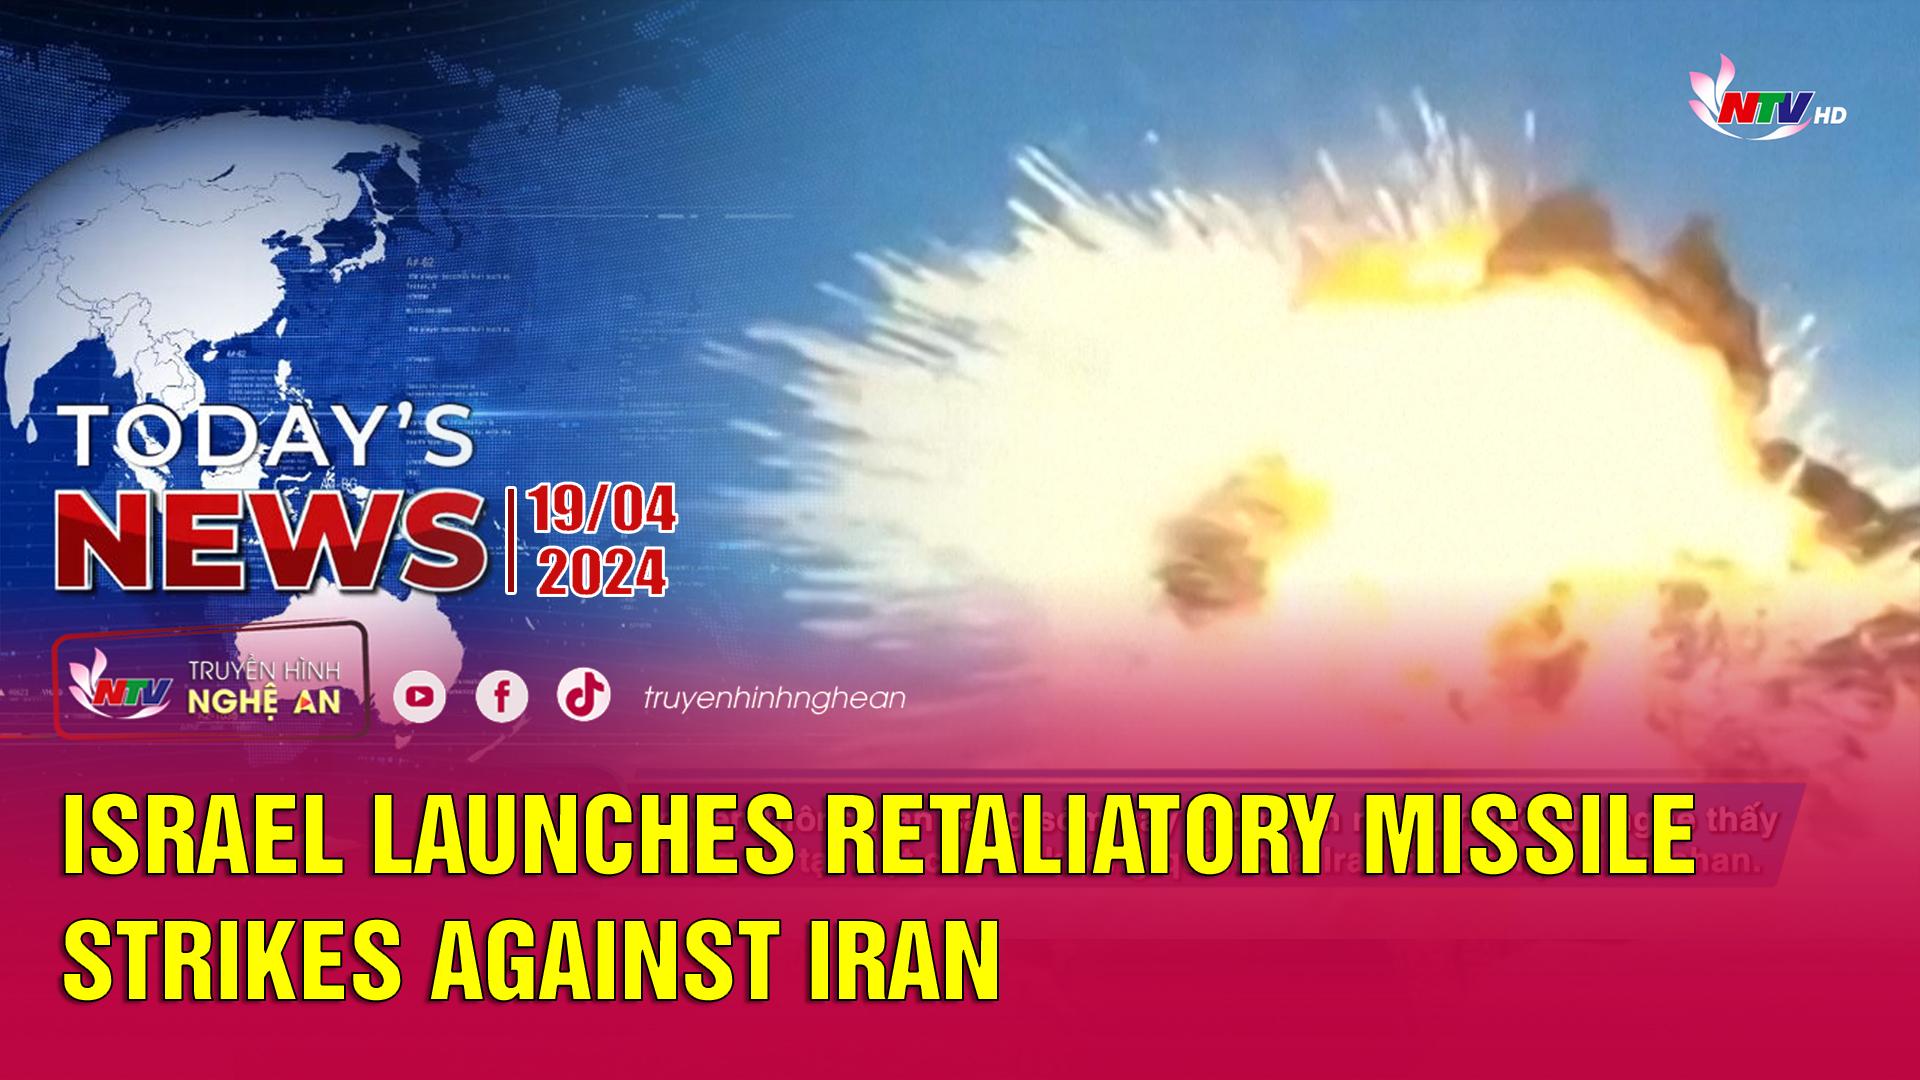 Today's News - 19/04/2024: Israel Launches Retaliatory Missile Strikes Against Iran